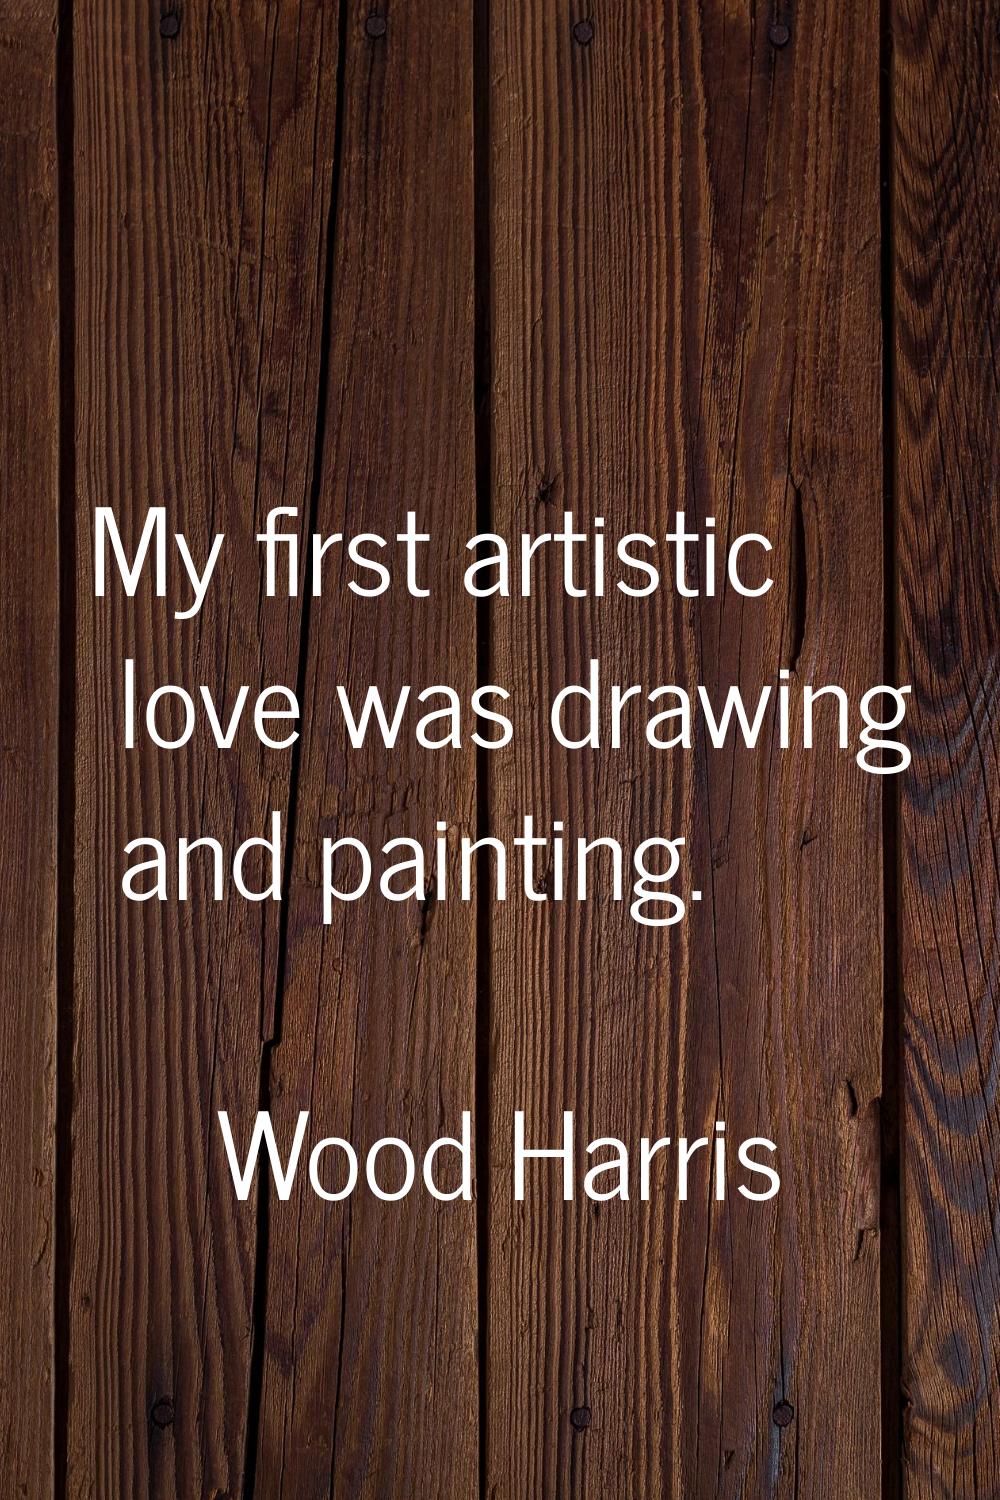 My first artistic love was drawing and painting.